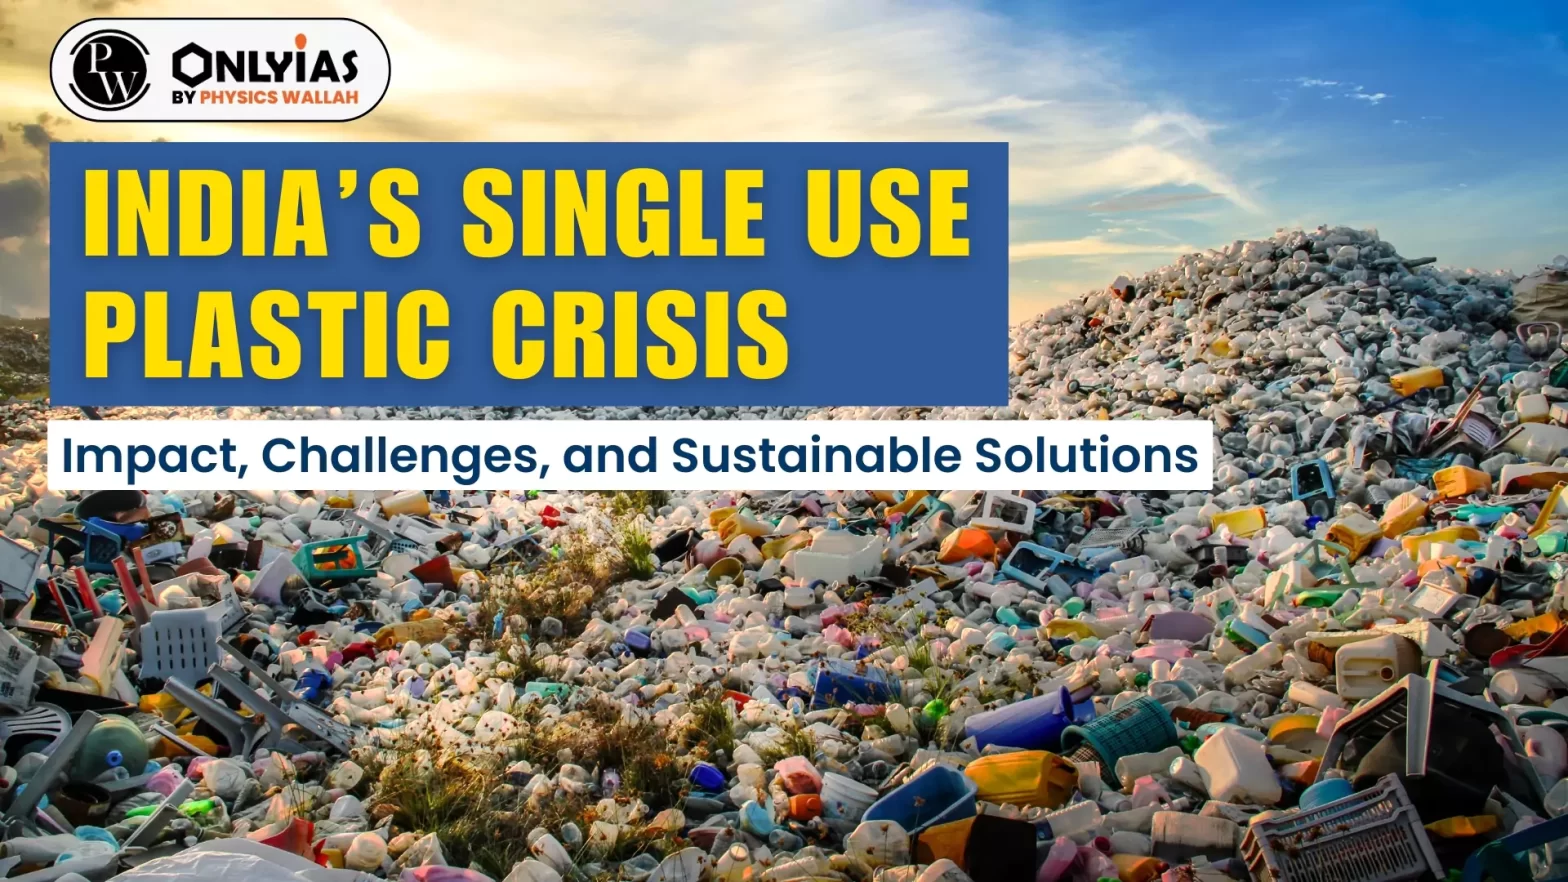 India’s Single Use Plastic Crisis: Impact, Challenges, and Sustainable Solutions